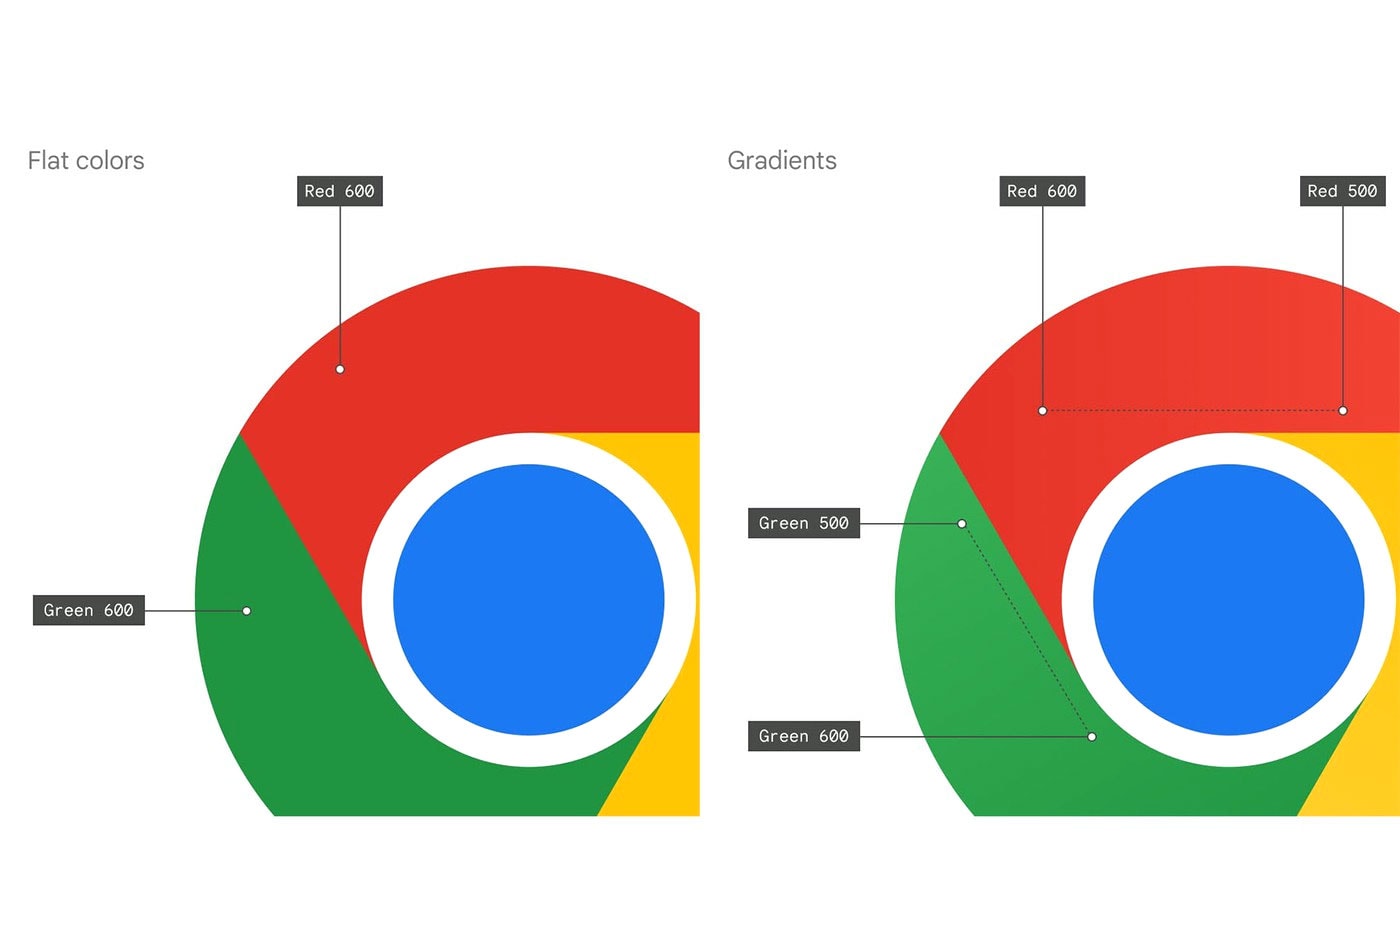 Google Chrome Changes Icon Design for First Time in 8 Years elvin hu twitter flatter simpler gradients larger blue circle news